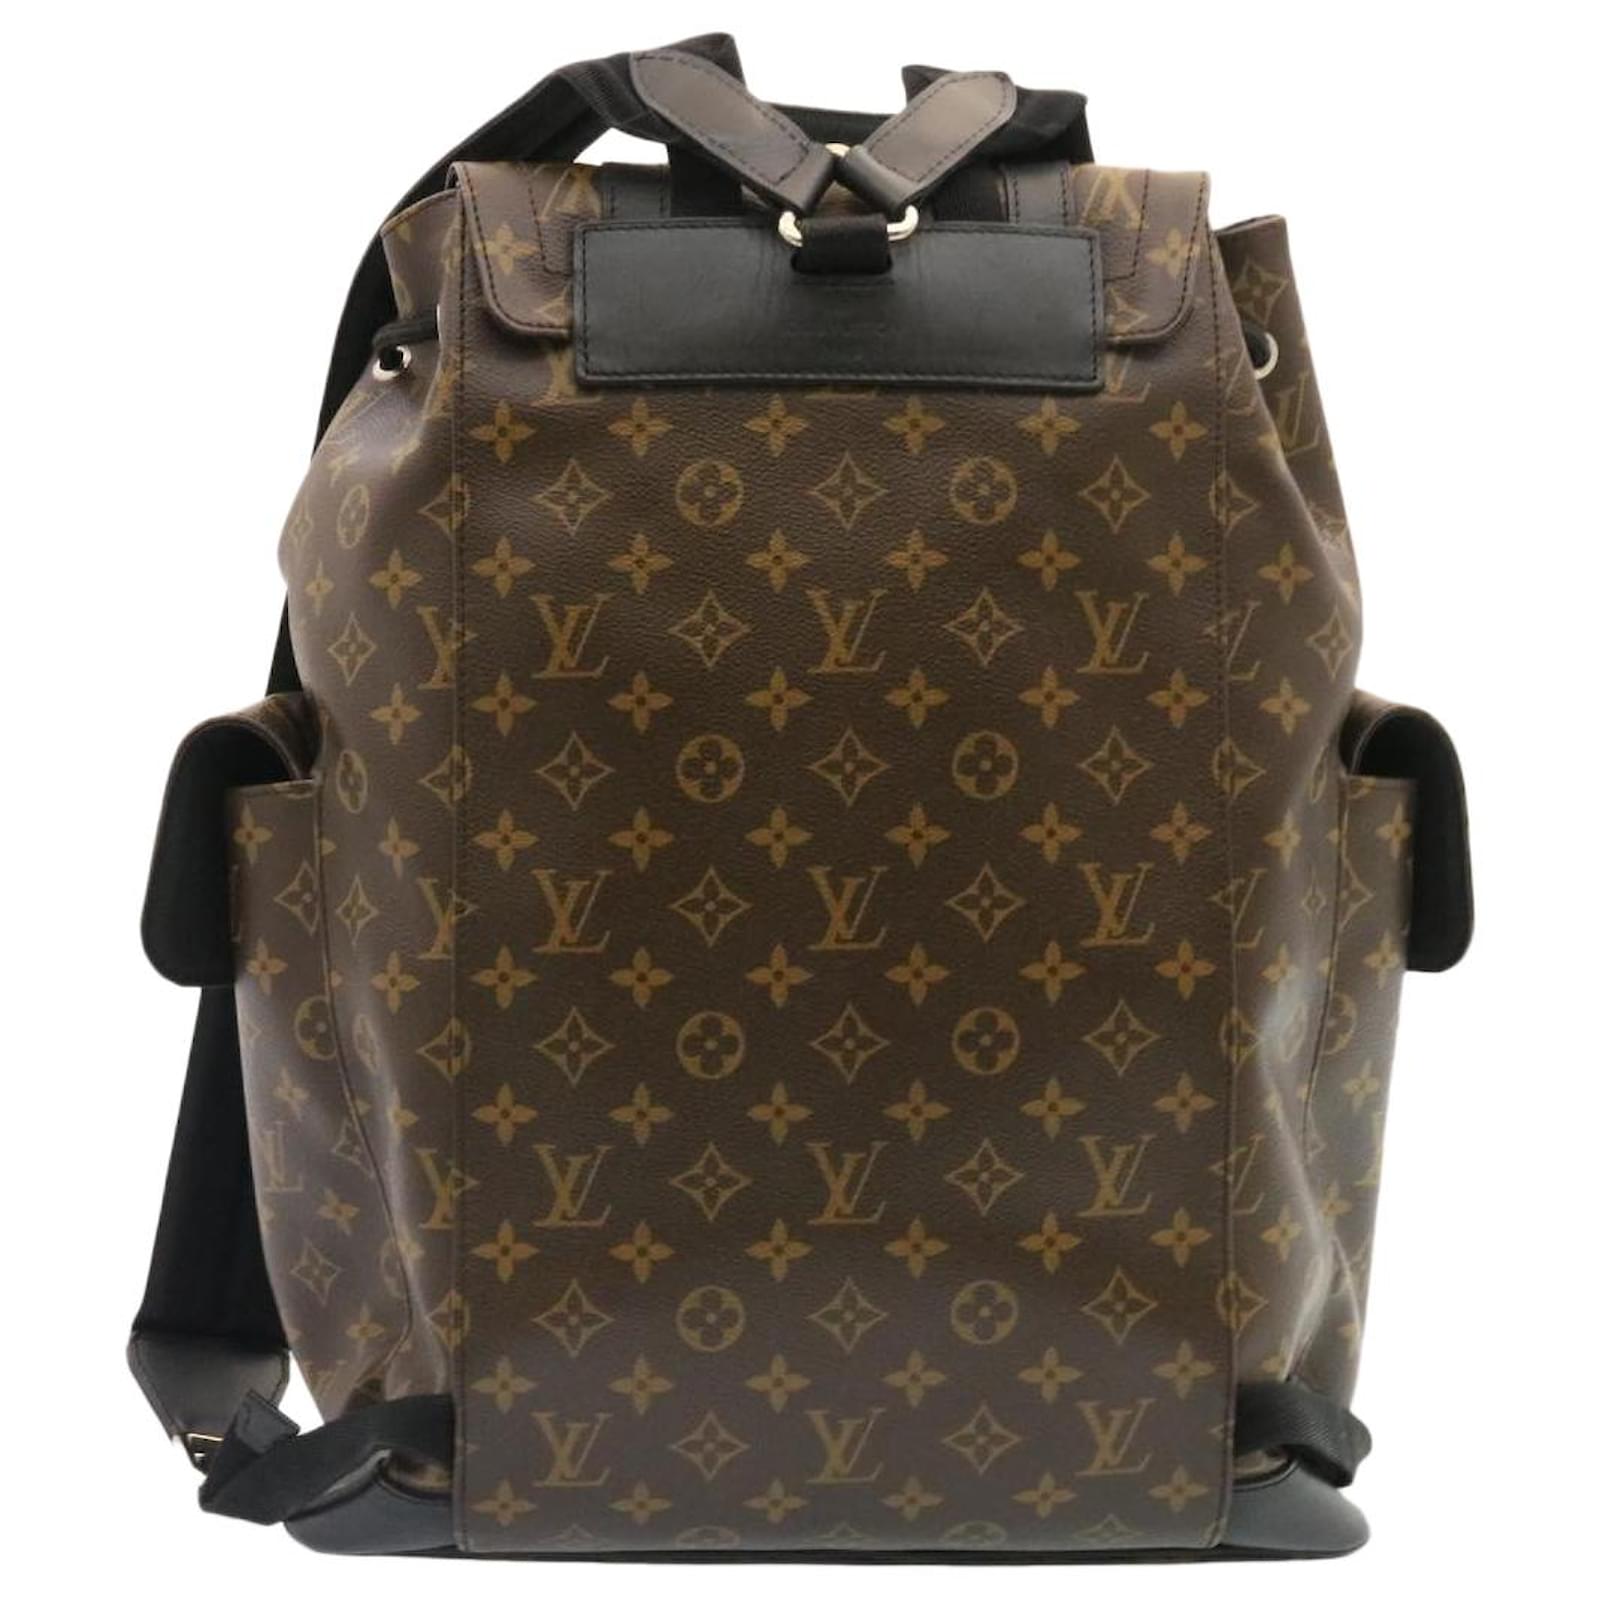 christopher louis vuitton backpack